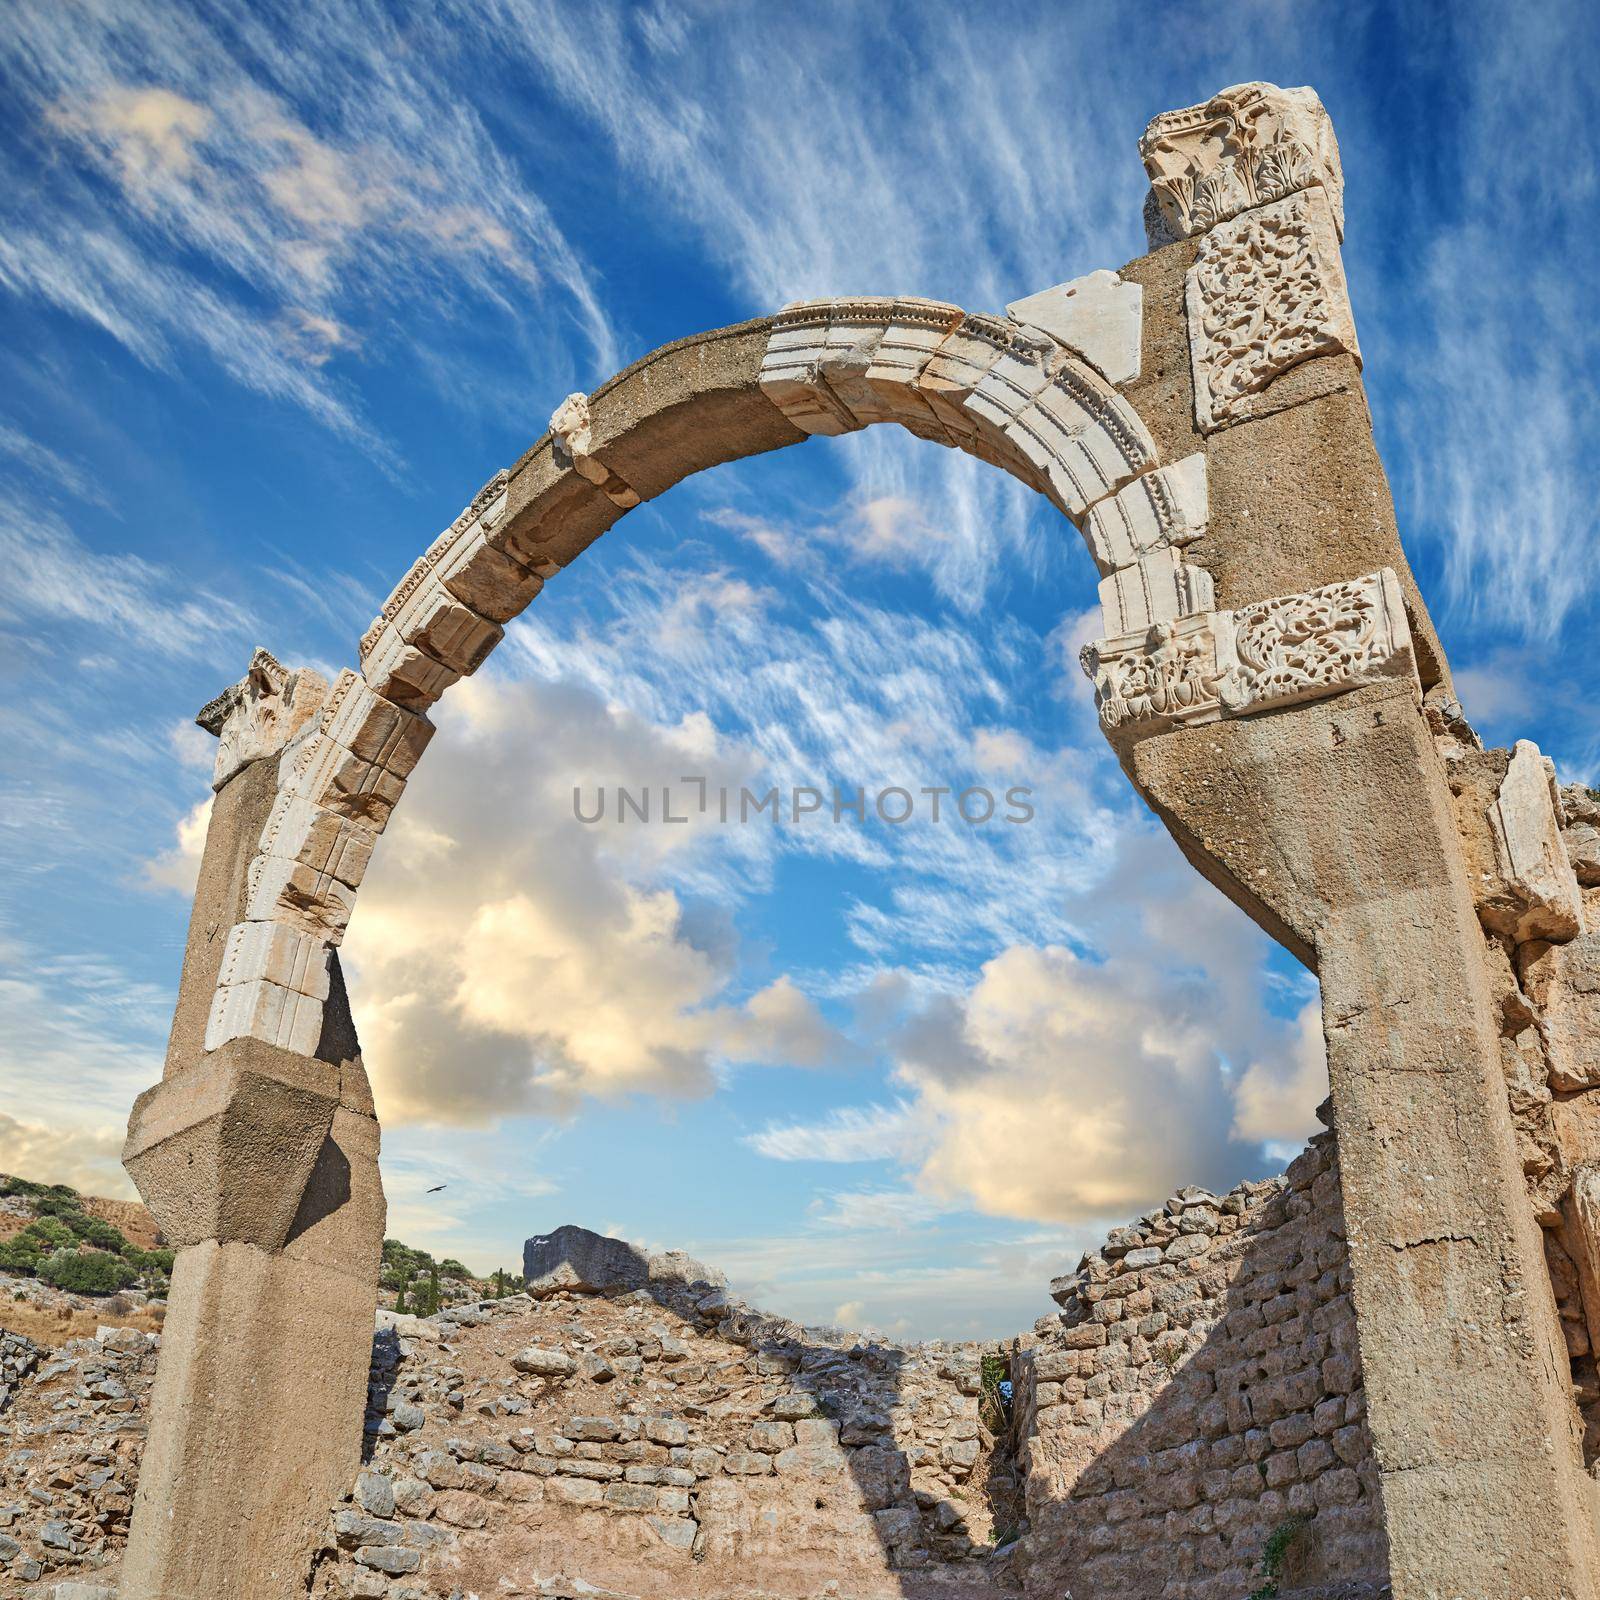 Old dilapidated city of Ephesus, Turkey under cloudy sky. Sightseeing and overseas travel for holiday, vacation and tourism. Excavated remains of historical structure from ancient history and culture by YuriArcurs